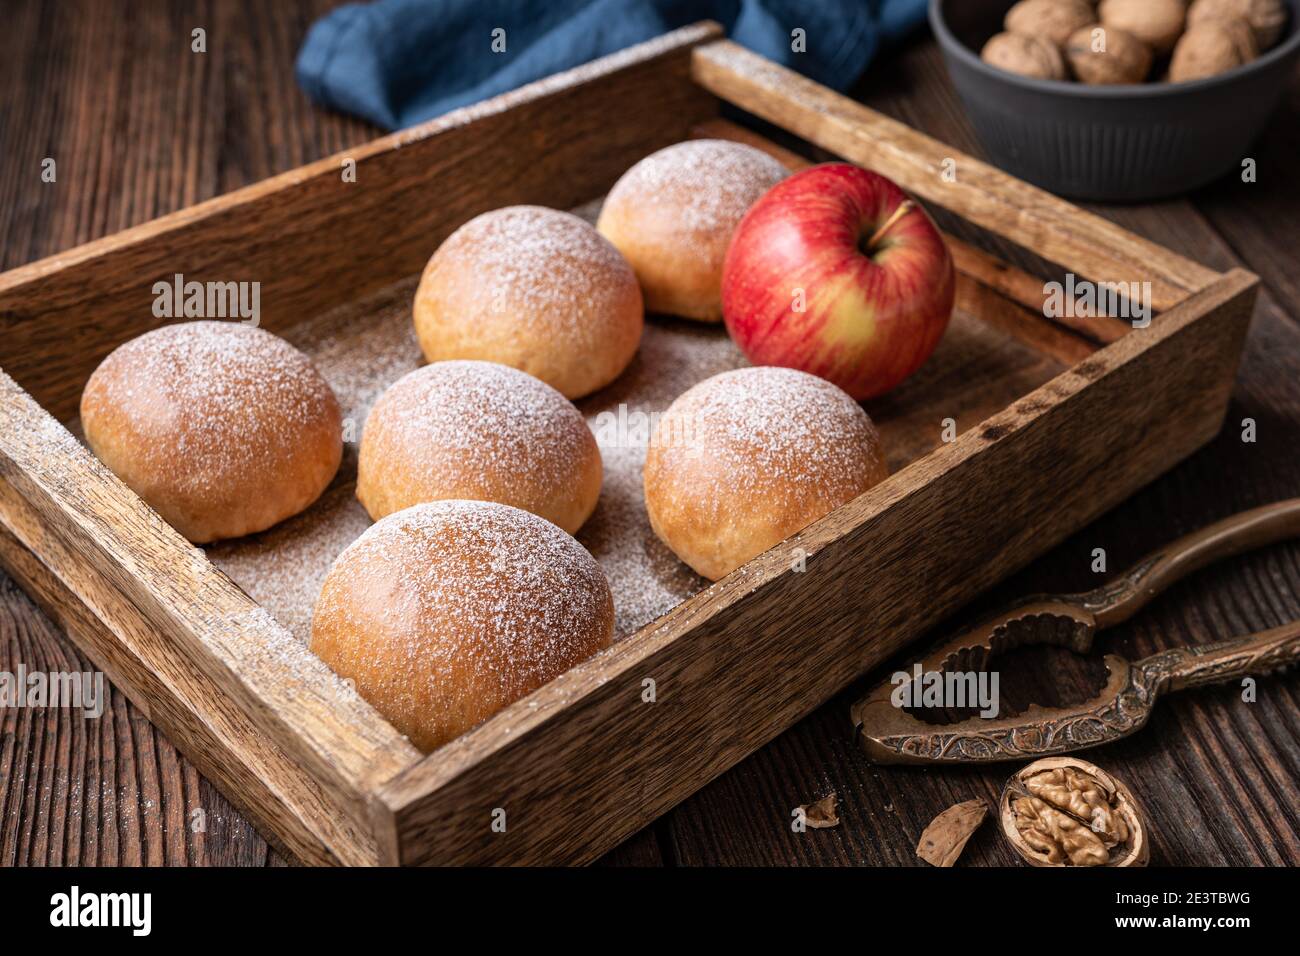 Delicious sweet pastry, baked buns with apple and walnut filling, sprinkled with powdered sugar Stock Photo